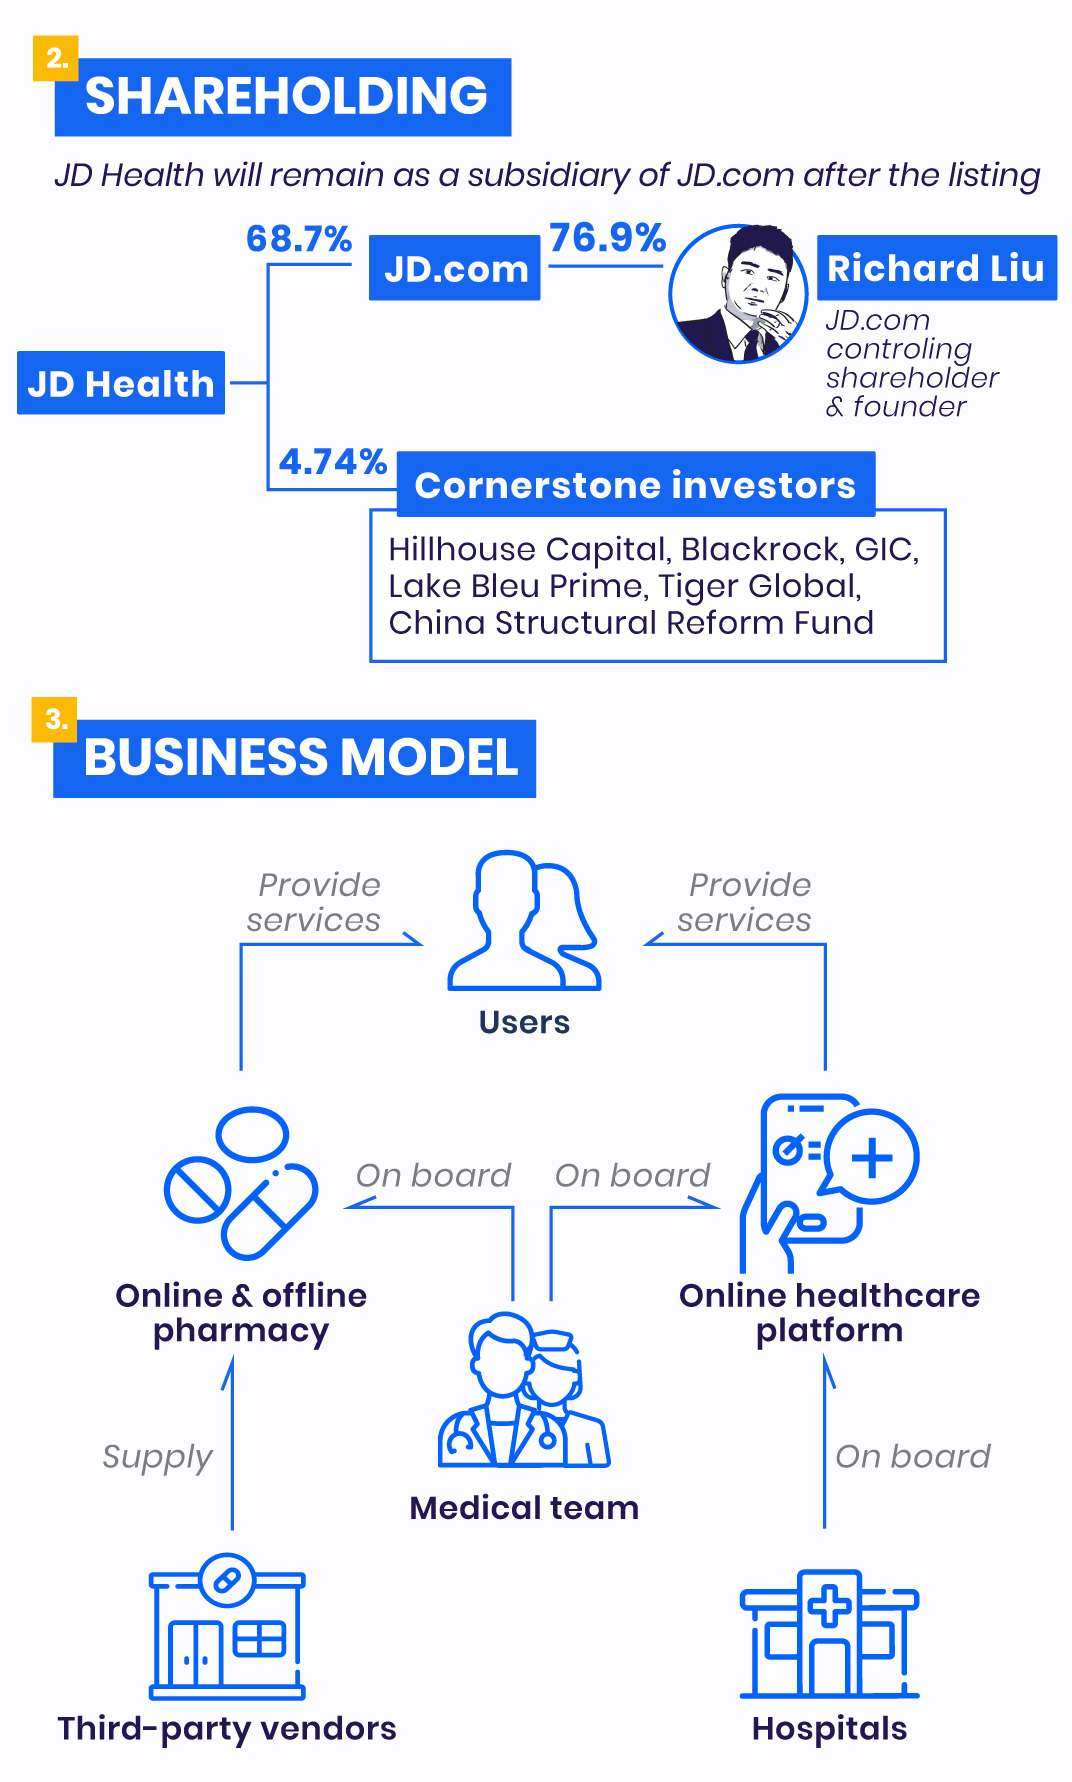 Shareholding and business model of JD Health